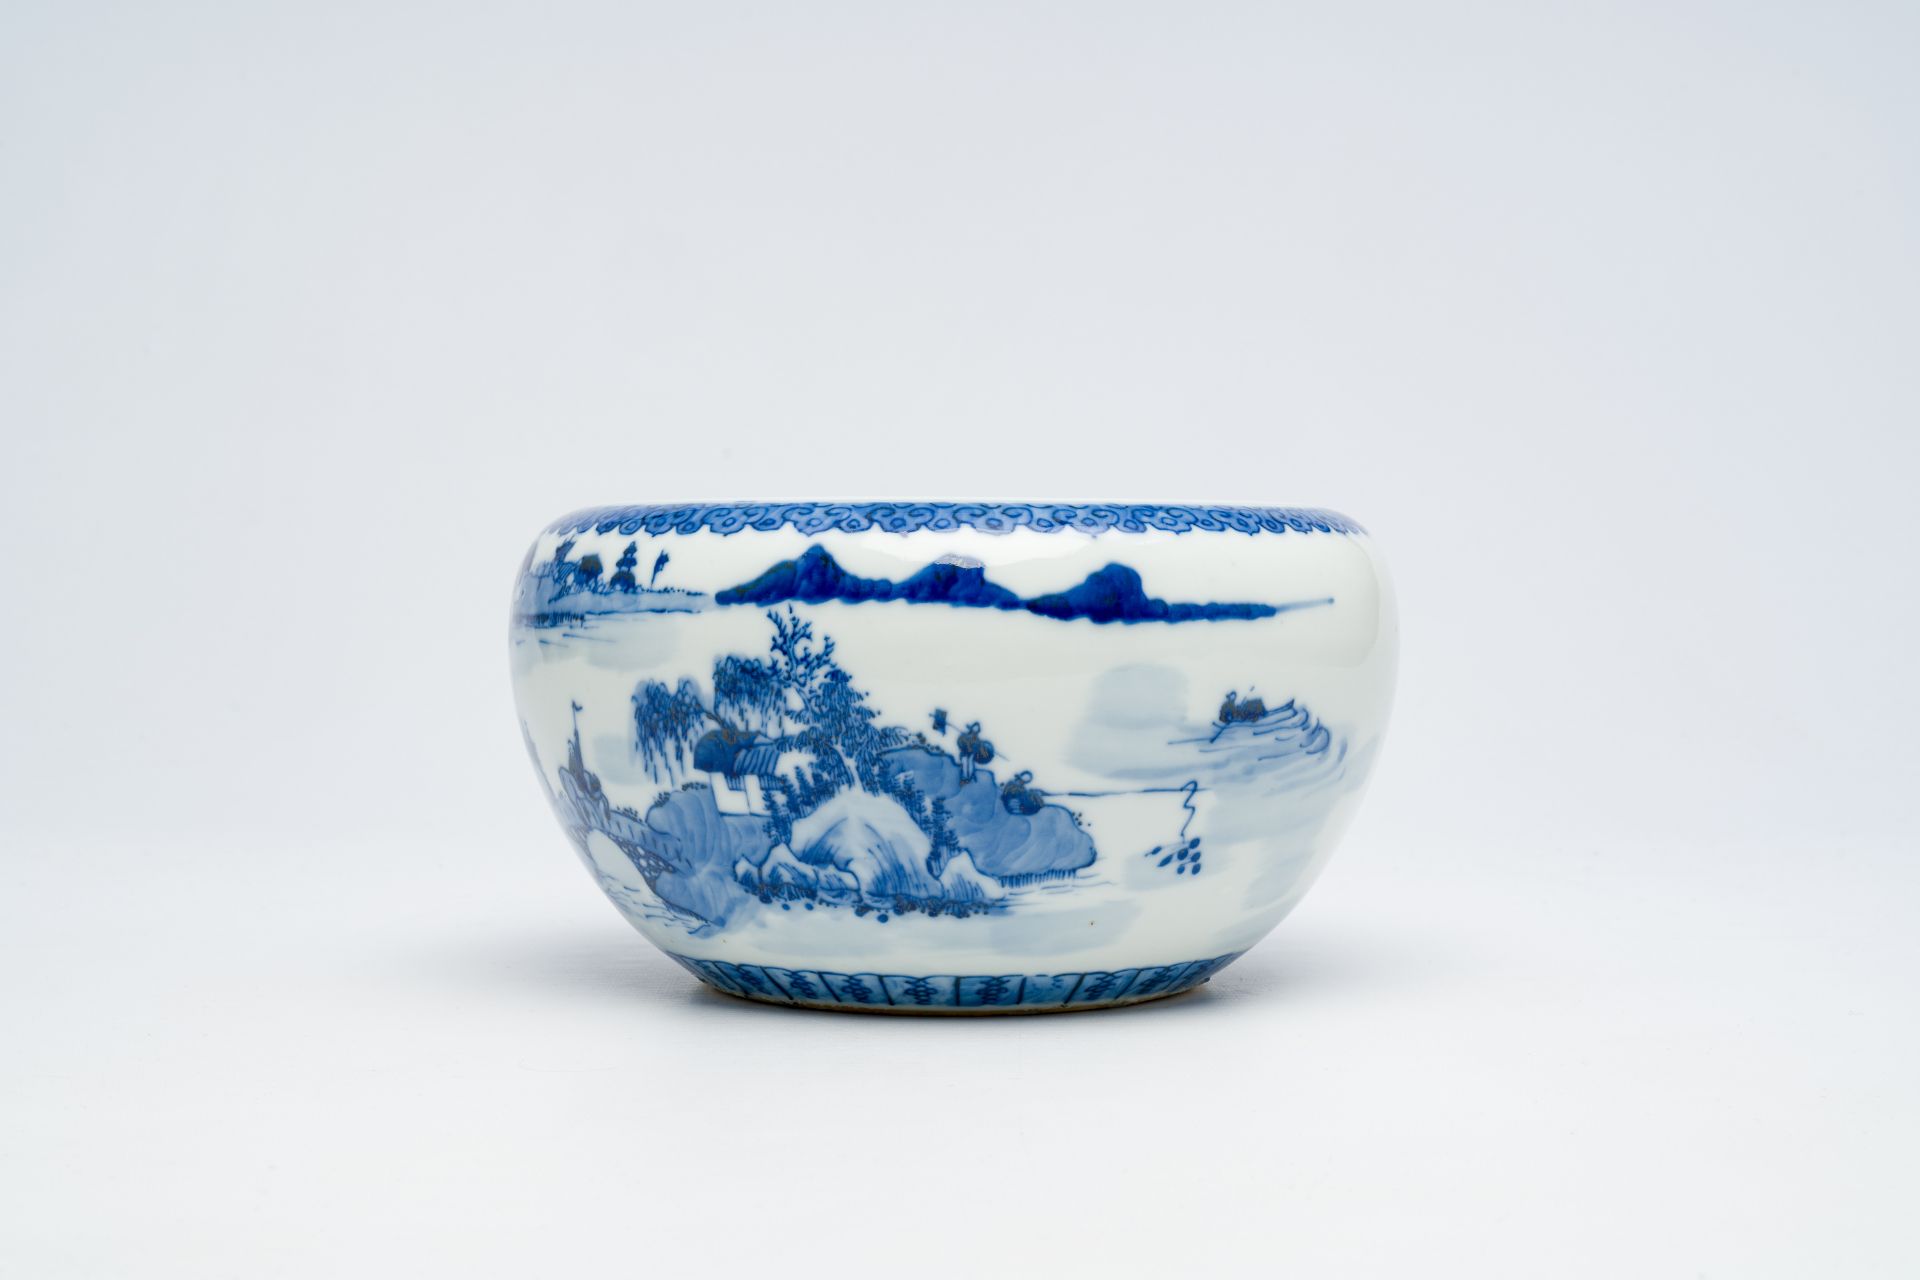 A varied collection of Chinese blue and white porcelain, 19th/20th C. - Image 22 of 30